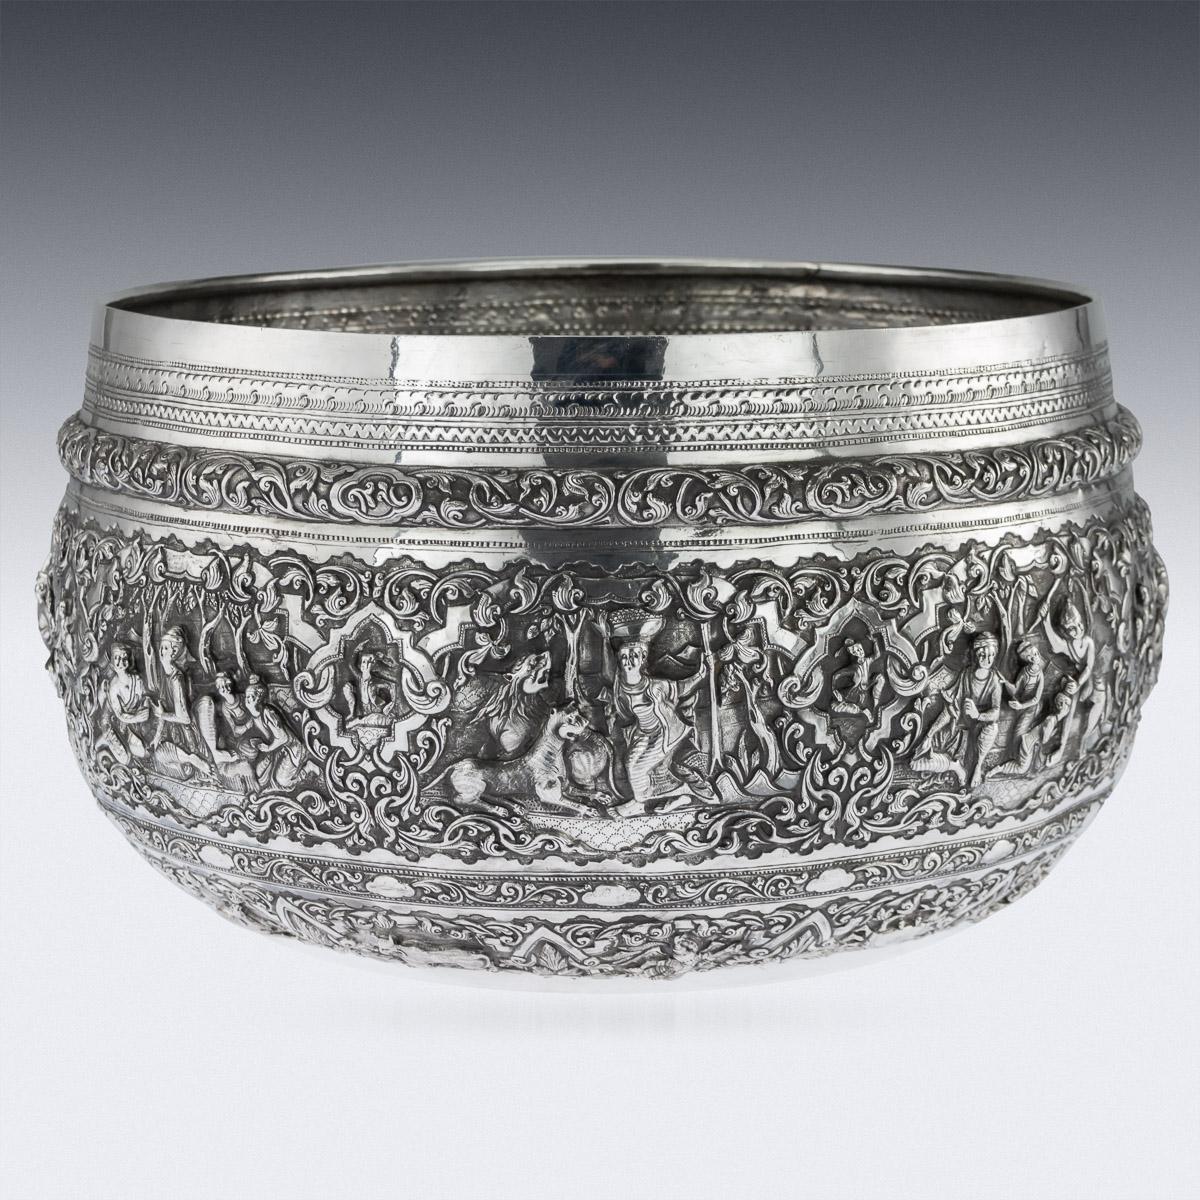 Antique early-20th century monumental Burmese, (Myanmar) solid silver Thabeik bowl, repousse' decorated in high relief with detailed panels depicting different traditional scenes from the Burmese mythology, showing very detailed figures set against